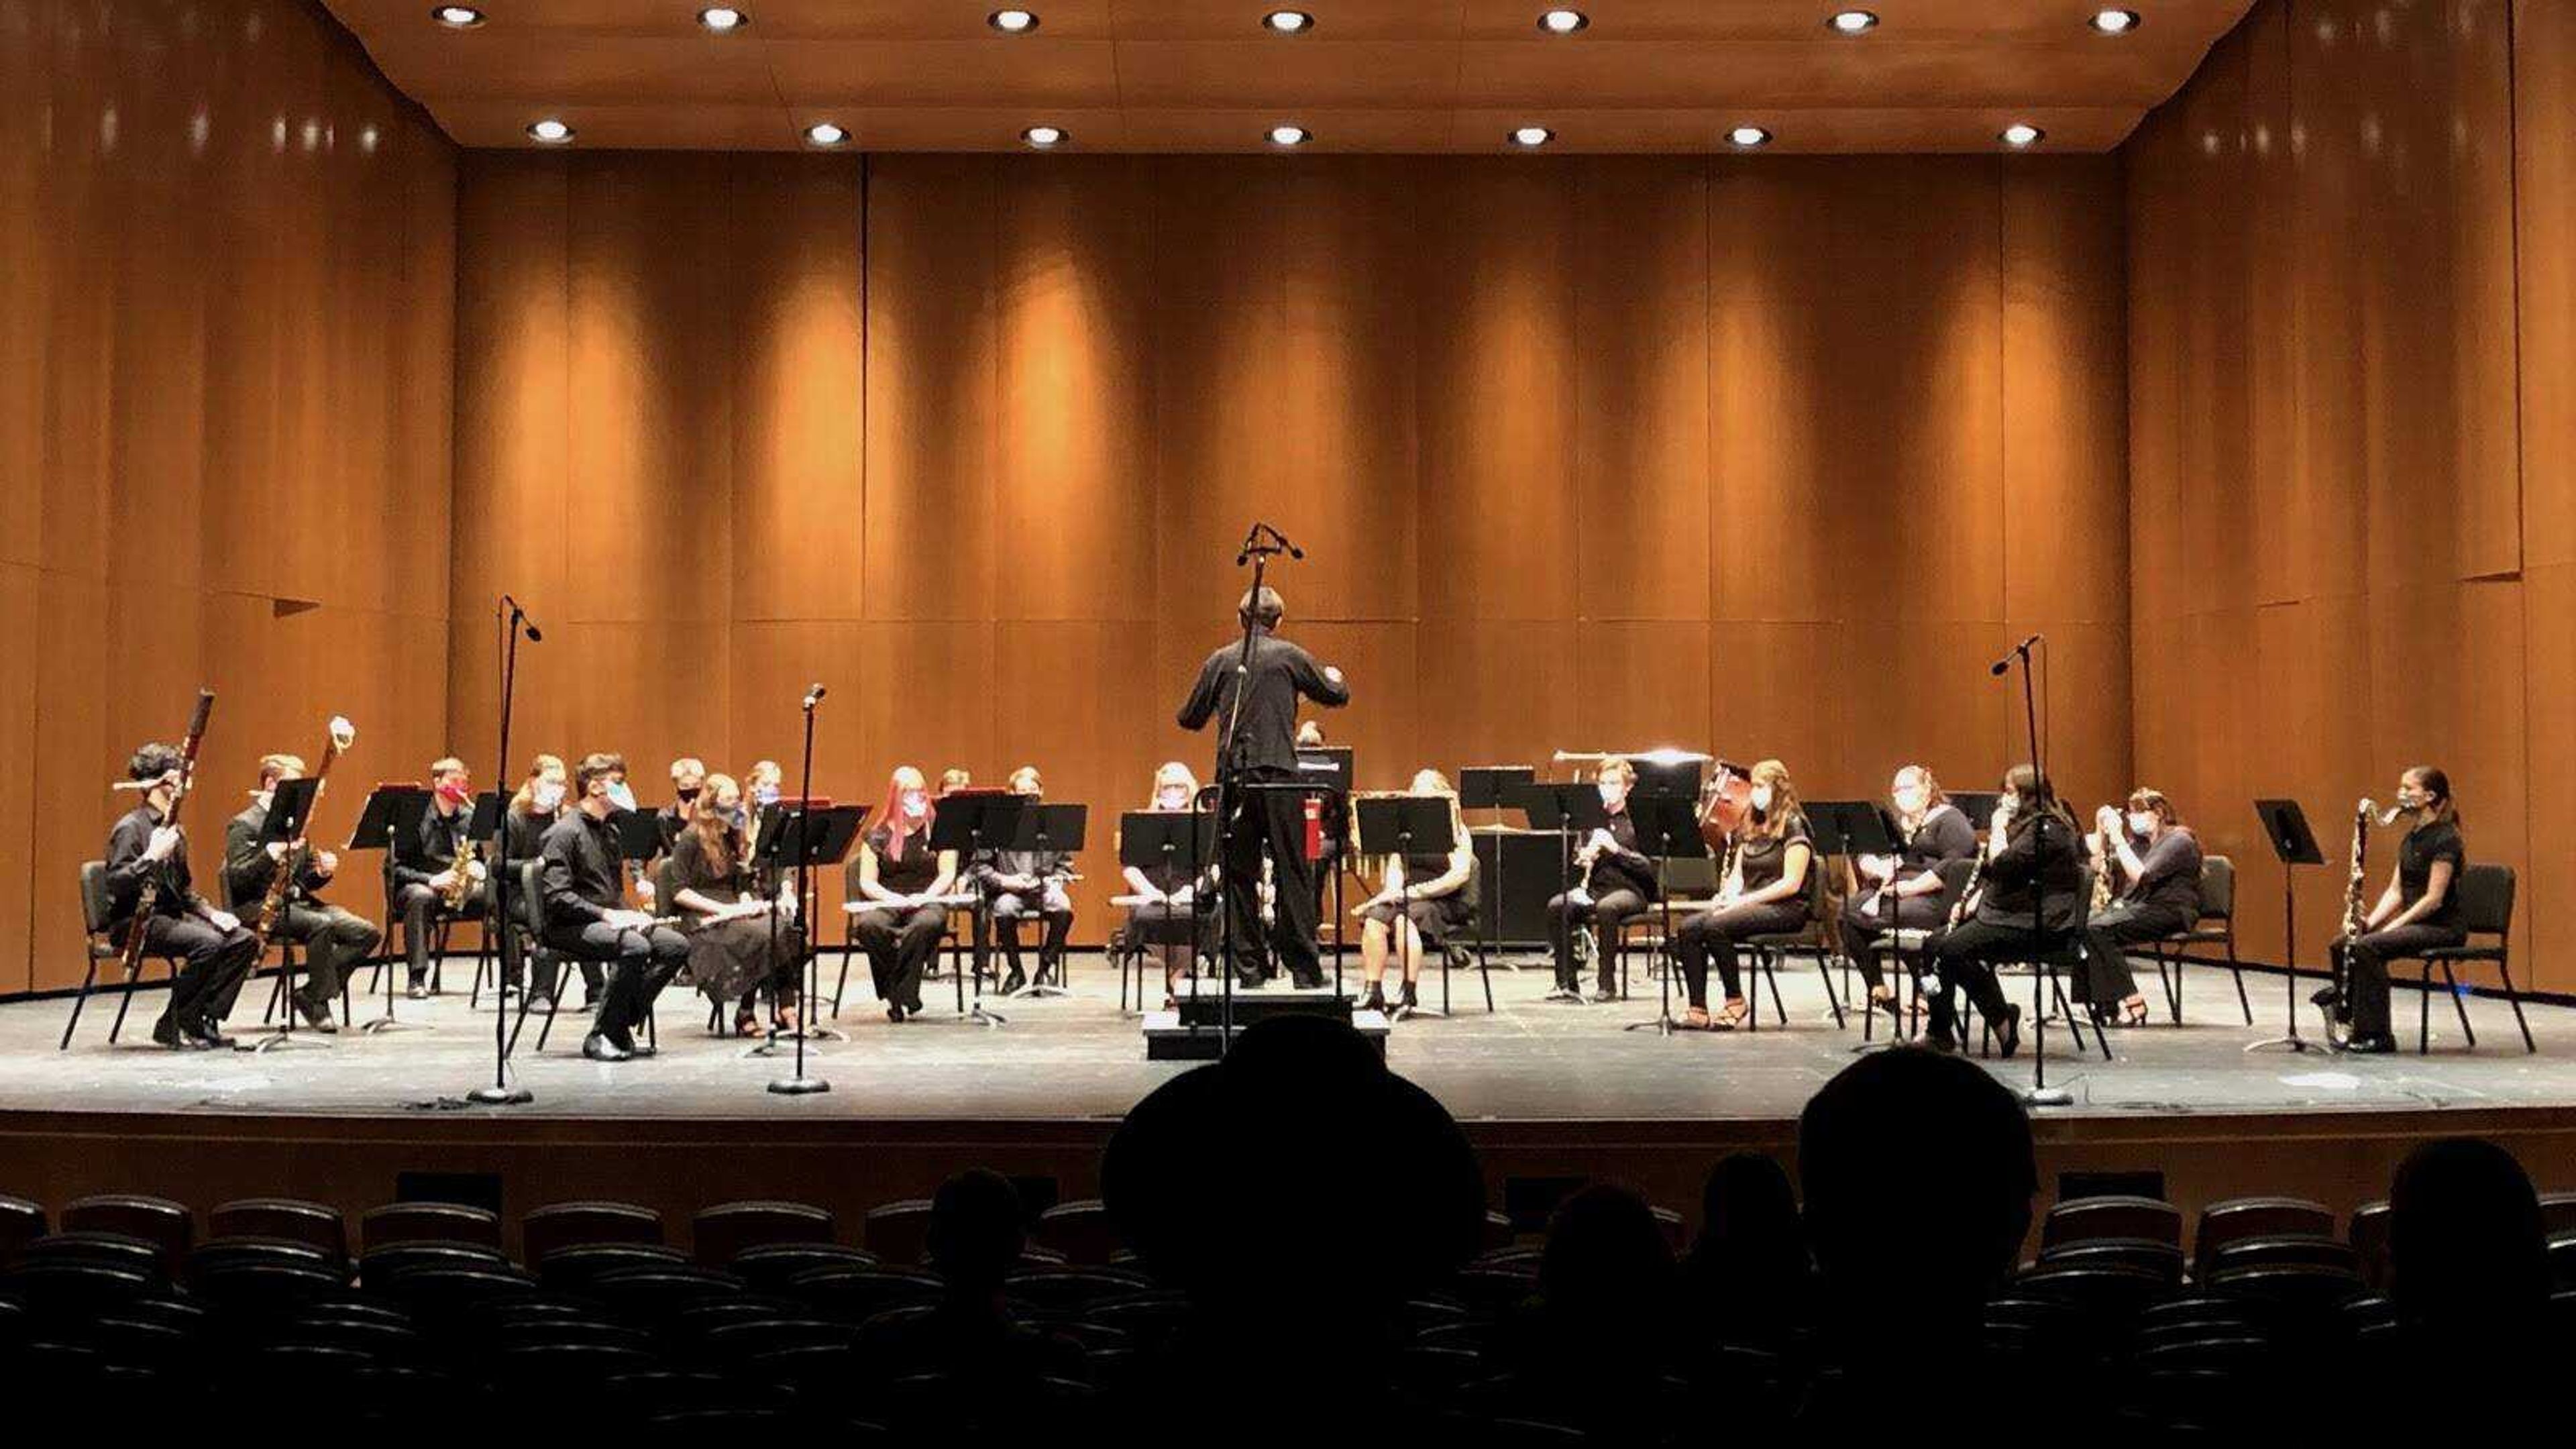 At the Bedell Performance Hall on March 2, Professor Robert M. Gifford (middle) conducts the soloist-heavy piece “Aria with Fughetta” for the woodwind section of the Southeast Wind and Percussion Ensemble.